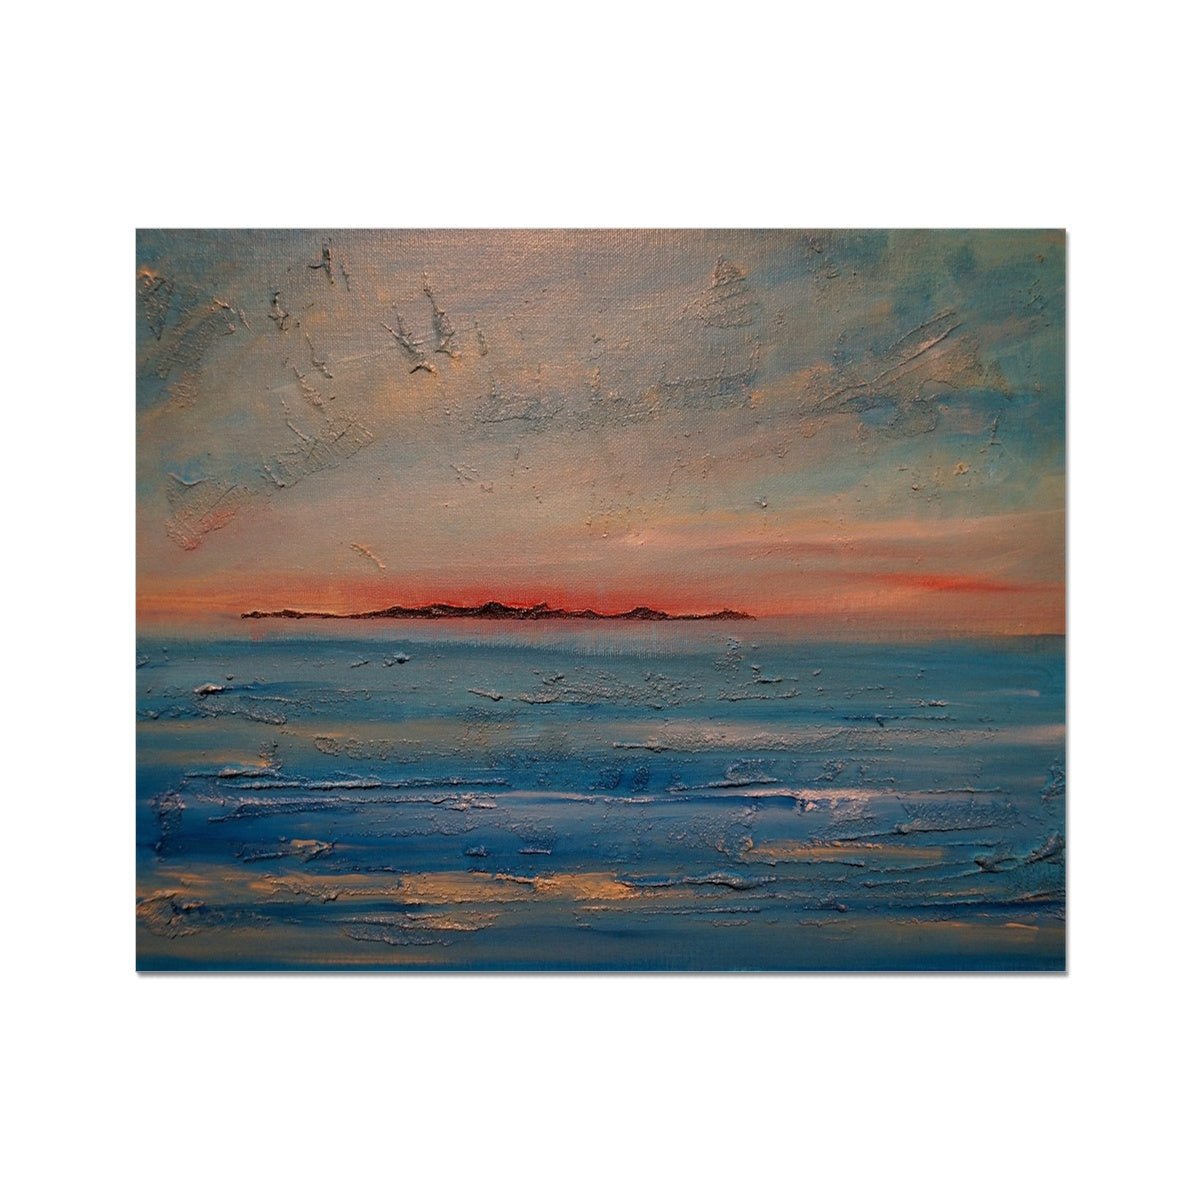 Gigha Sunset Painting | Artist Proof Collector Prints From Scotland-Artist Proof Collector Prints-Hebridean Islands Art Gallery-20"x16"-Paintings, Prints, Homeware, Art Gifts From Scotland By Scottish Artist Kevin Hunter